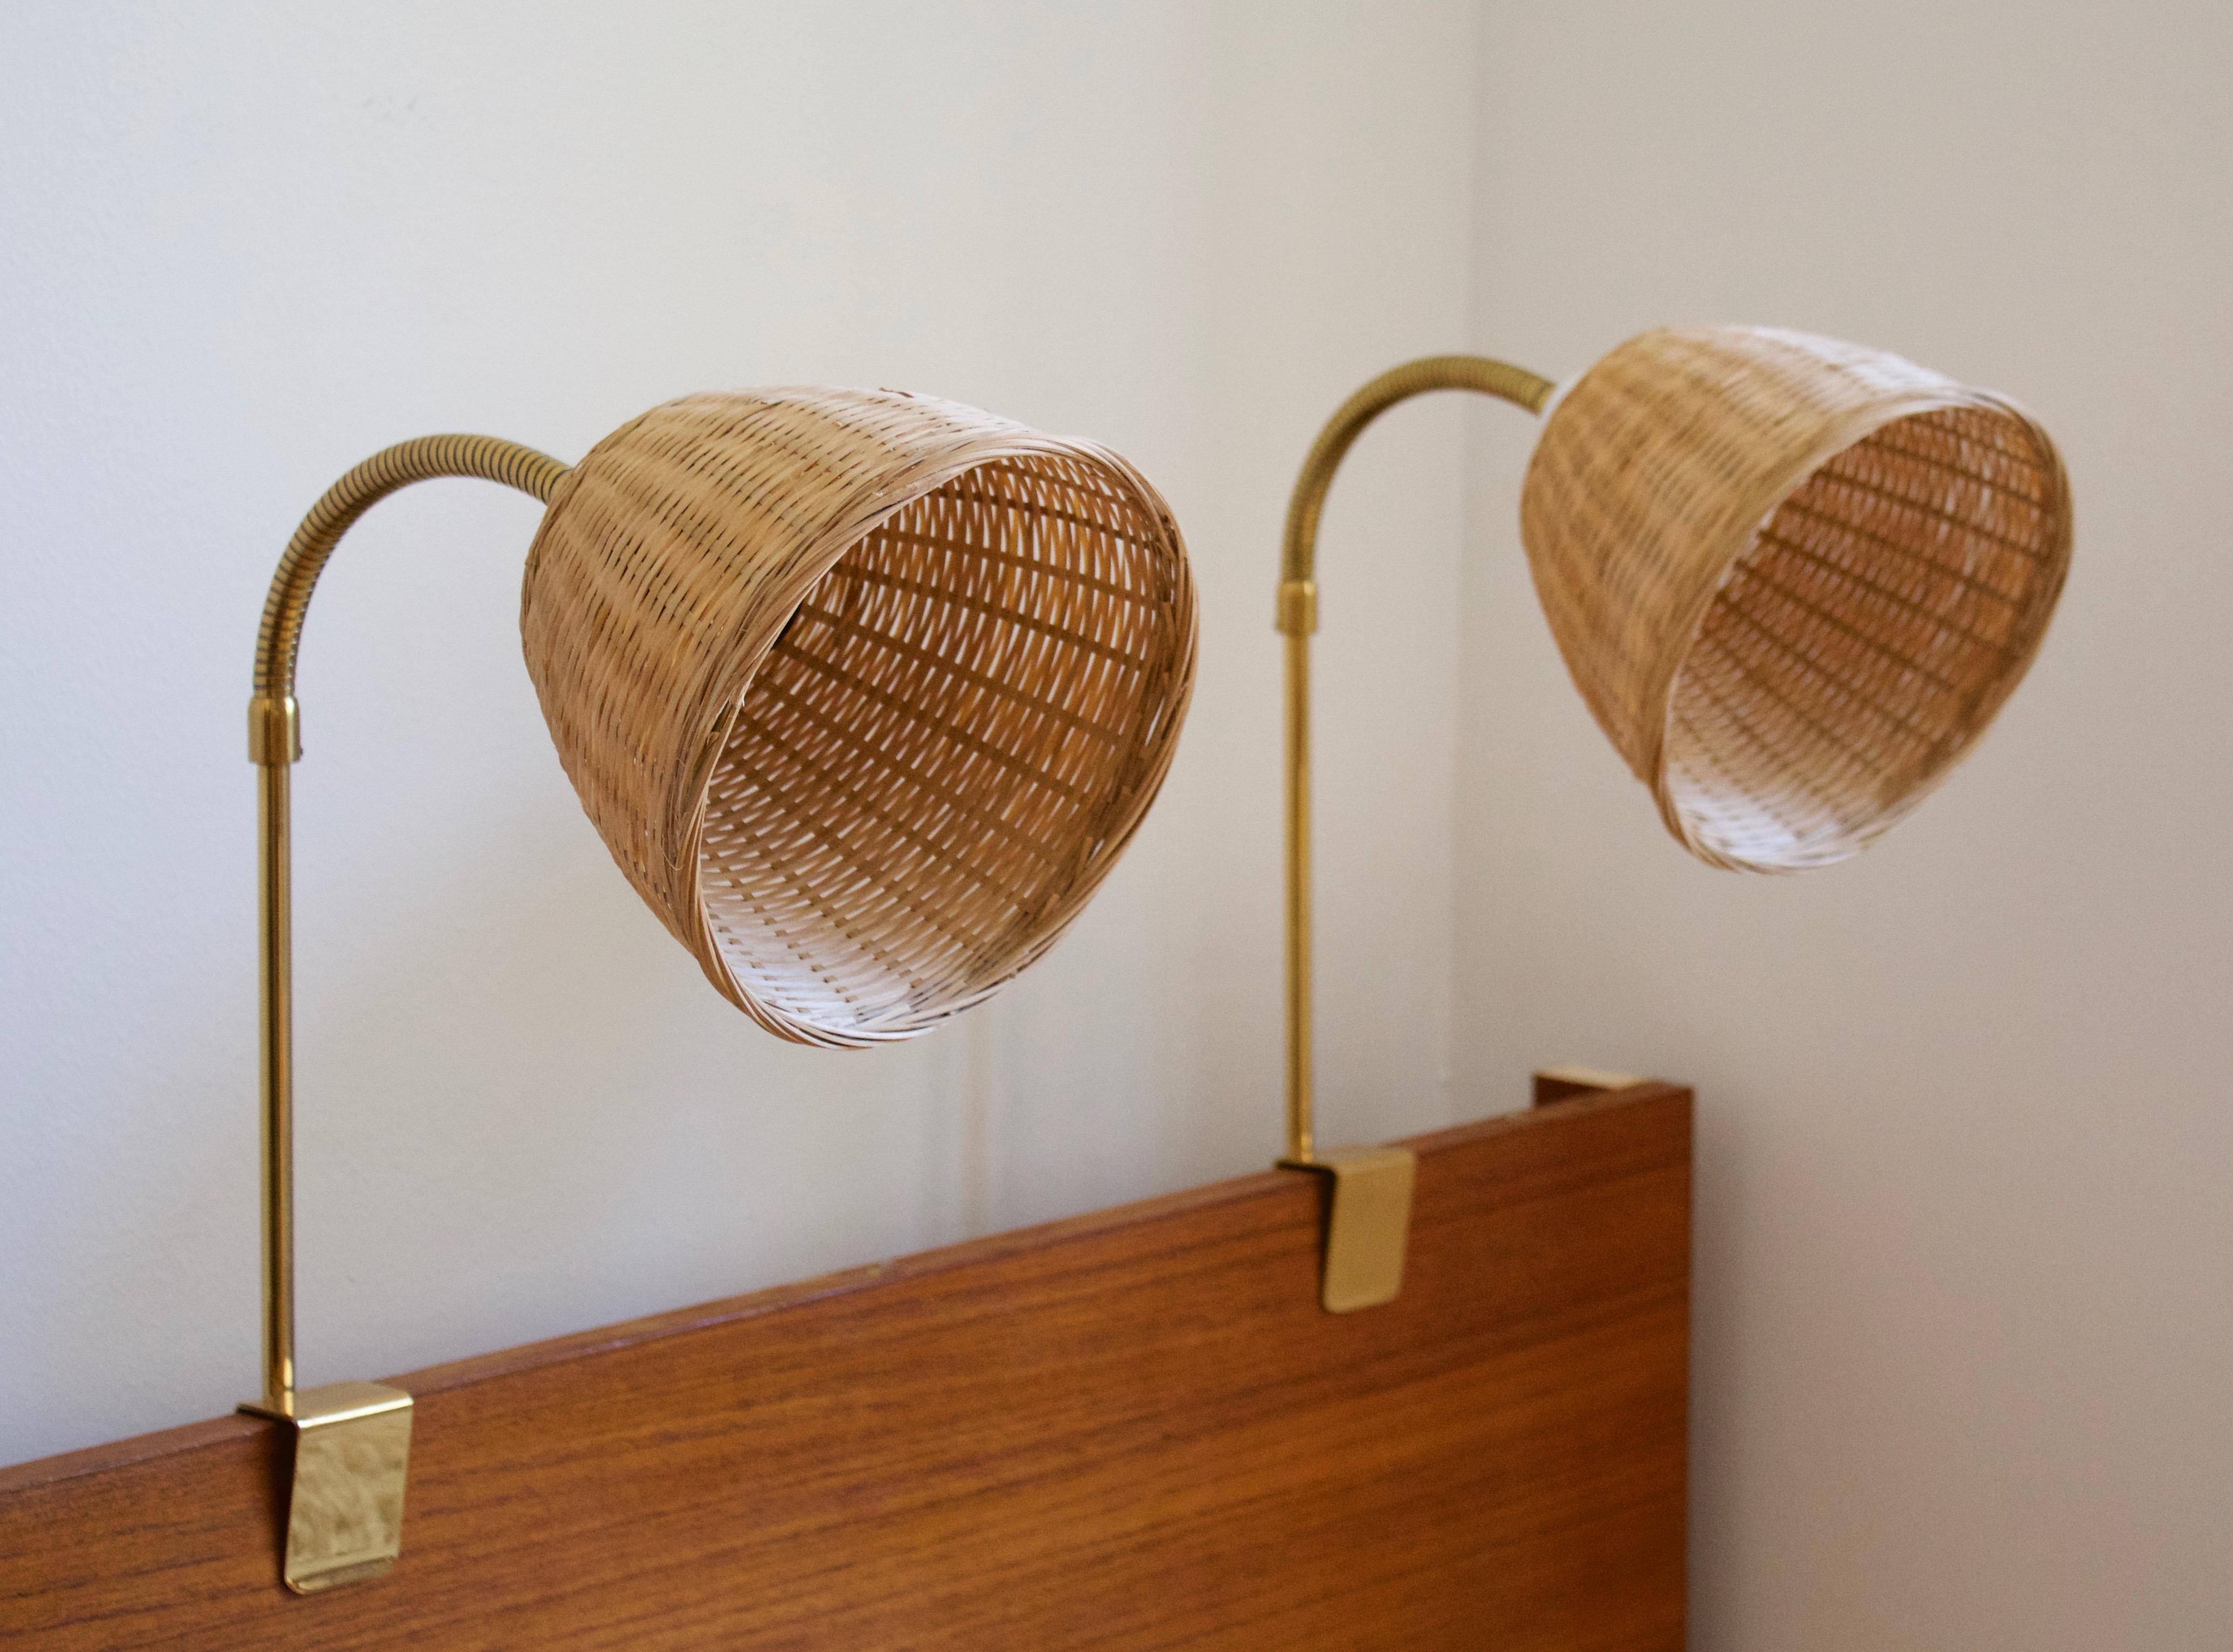 A functionalist bedpost light / task lights, designed and produced in Sweden, c. 1950s-1960s. Features brass, assorted vintage lampshades.

Stated dimensions with lampshade attached. Measurements variable